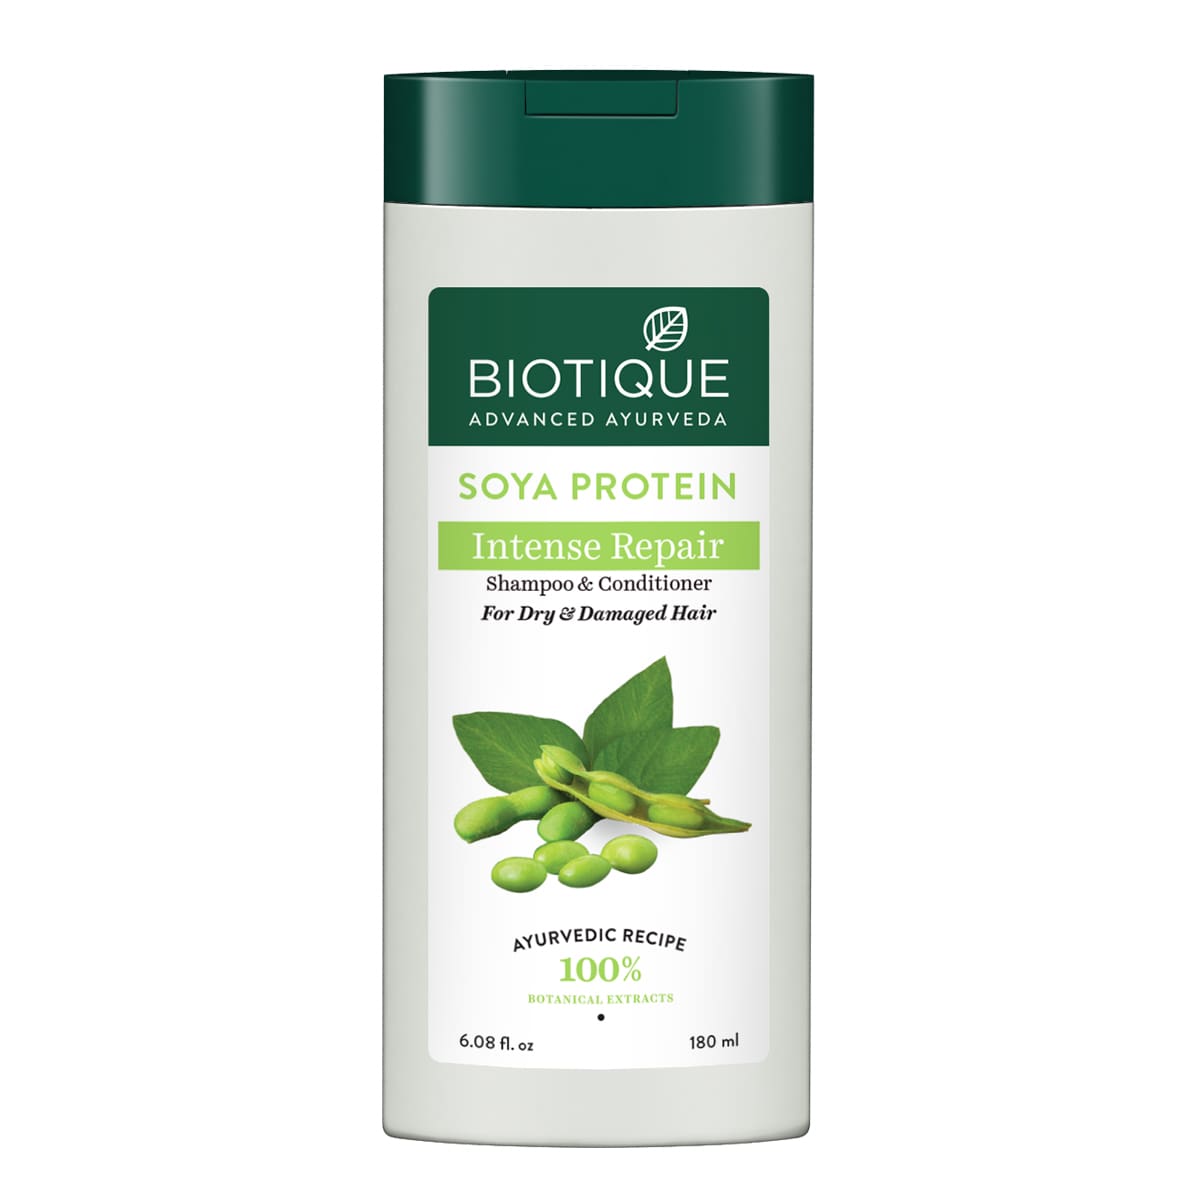 Biotique Soya Protein Intense Repair Shampoo & Conditioner 190ml (Pack of 2)